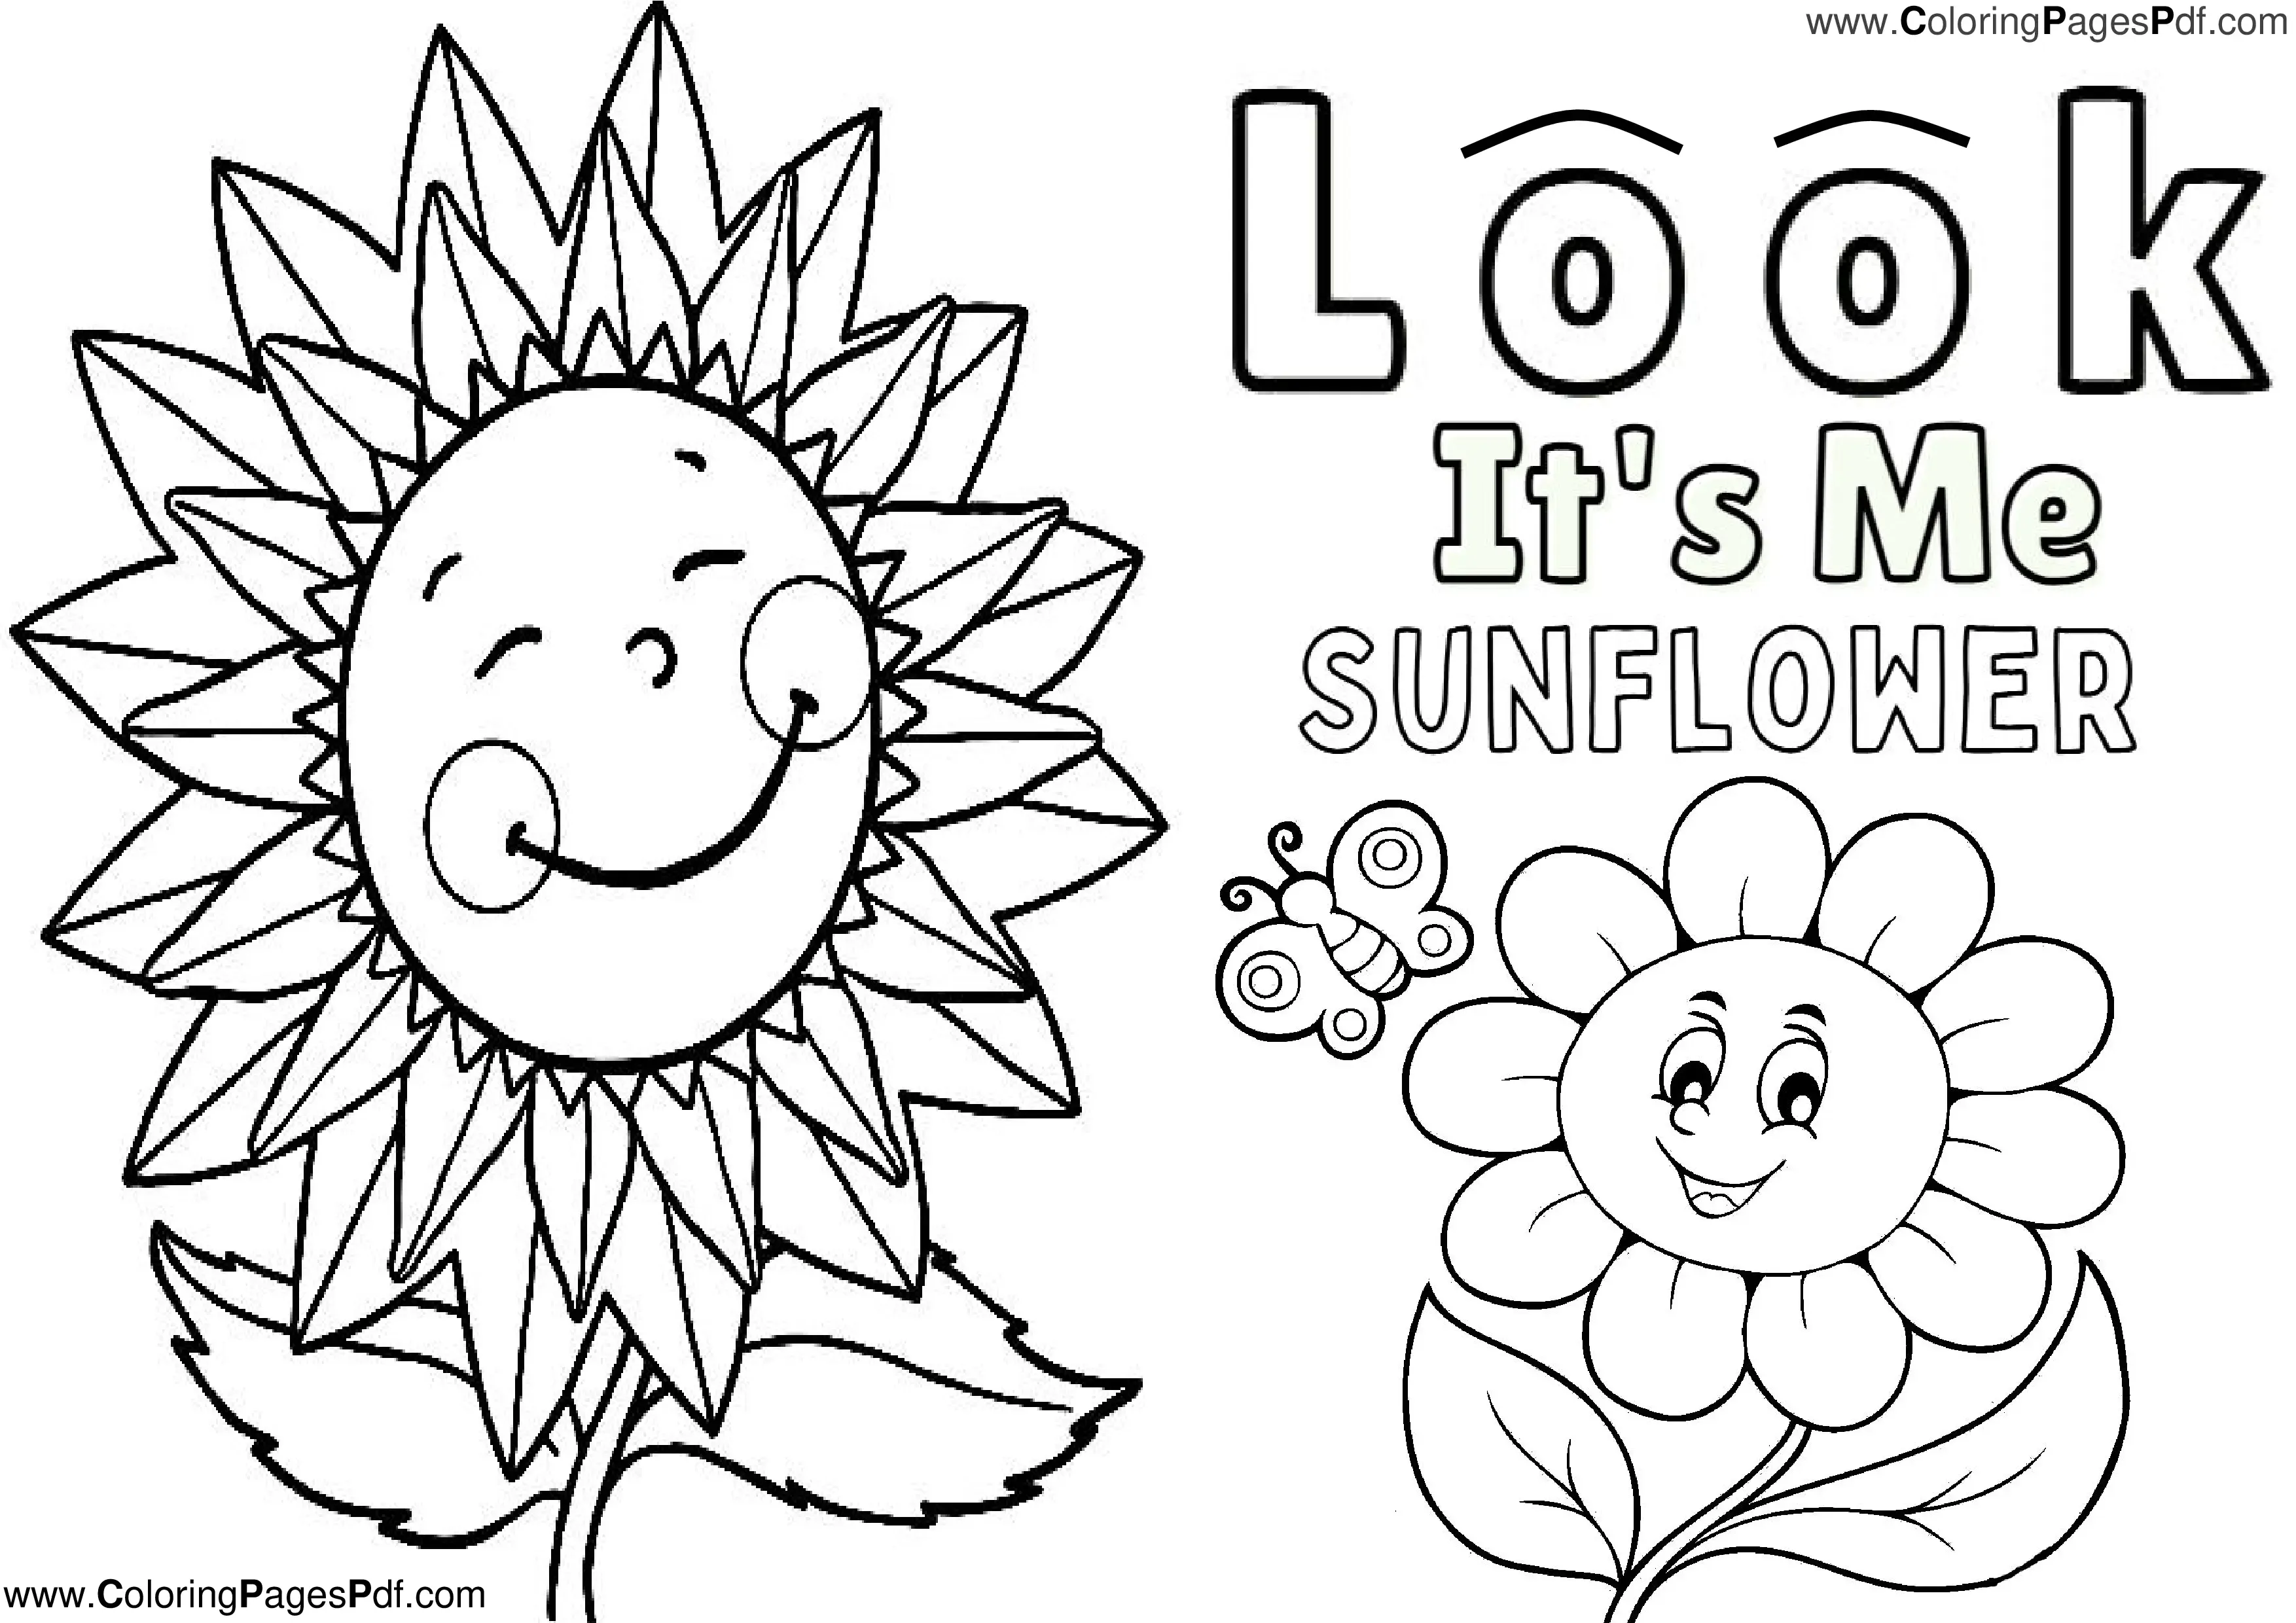 Sunflower coloring pages for preschoolers